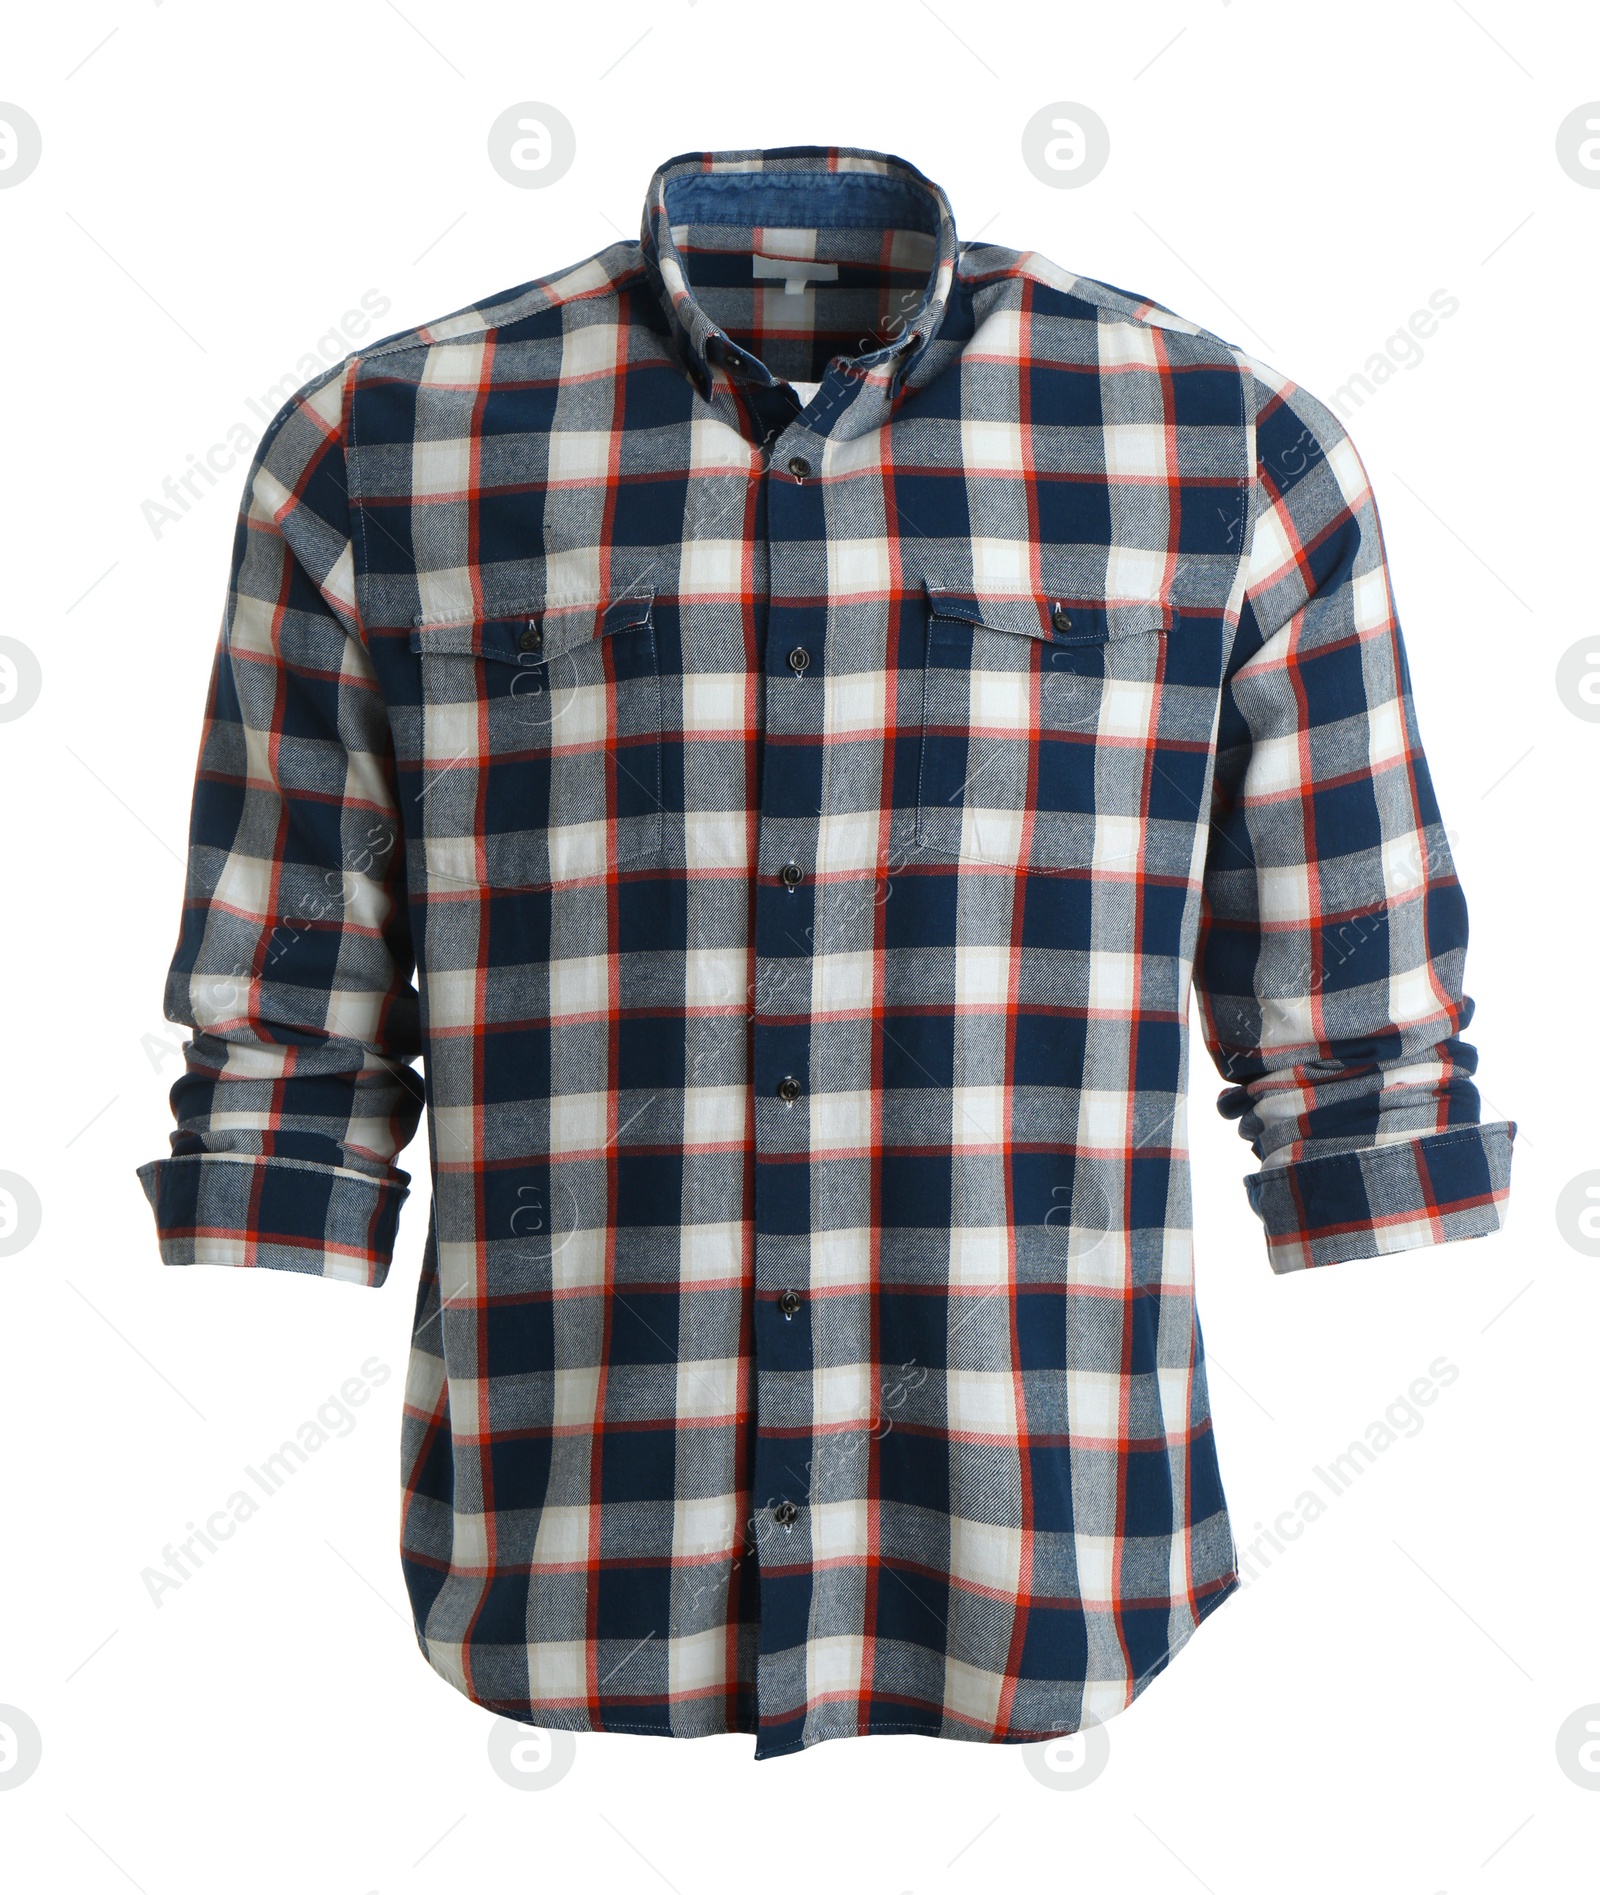 Photo of Checkered shirt on mannequin against white background